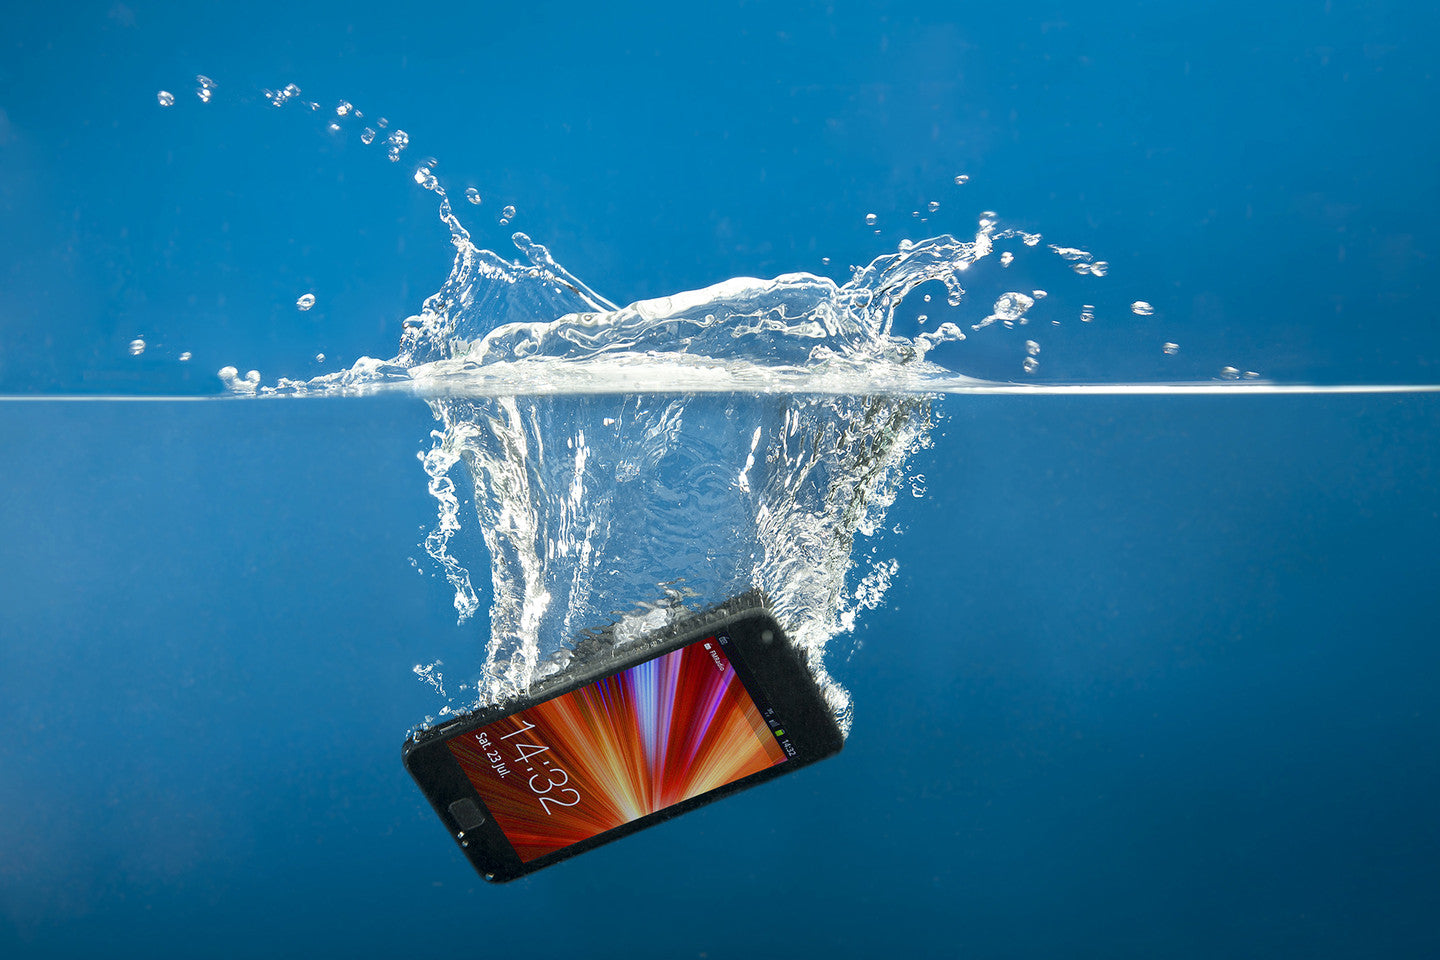 Did your phone get wet?